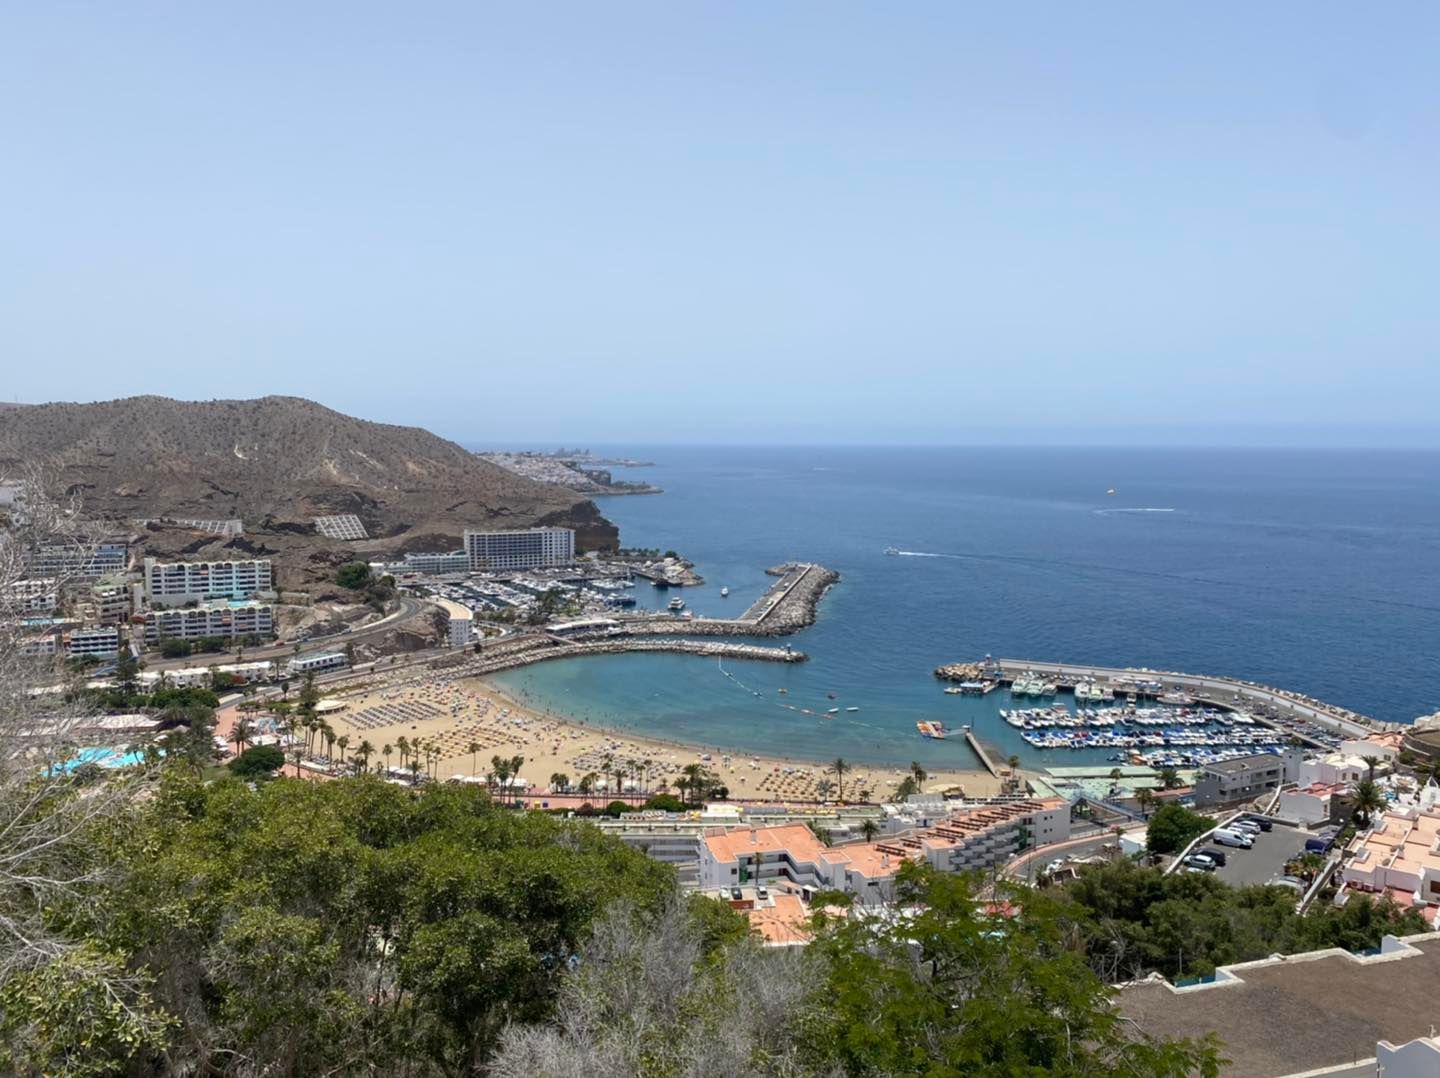 Gran Canaria heatwave starts to dissipate, though Orange advisory remains in place this Monday, 43ºC measured yesterday in Agüimes